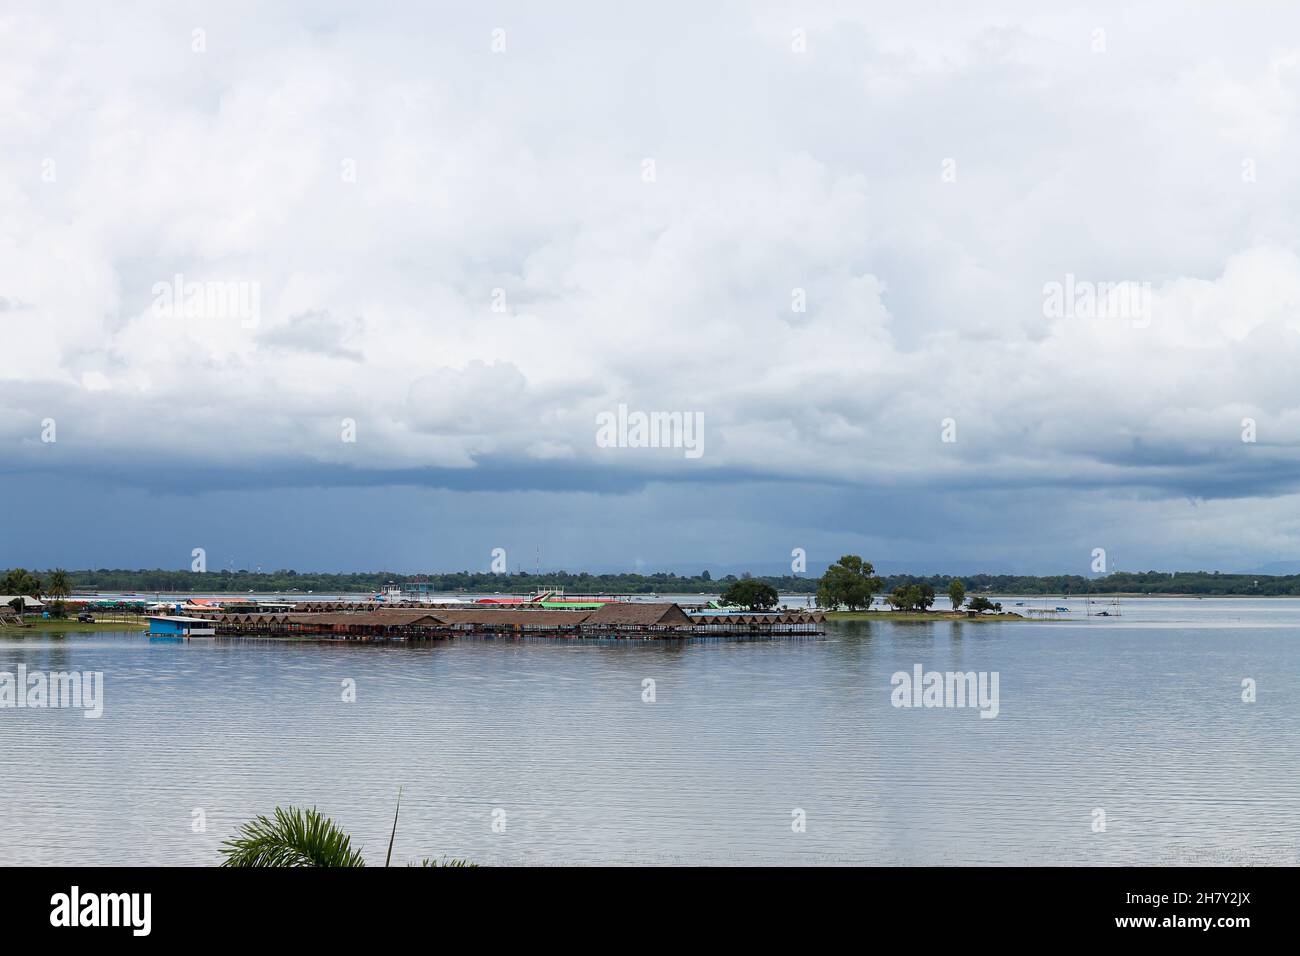 The beach and the water pavilion seen from far away. showing black rain clouds Stock Photo